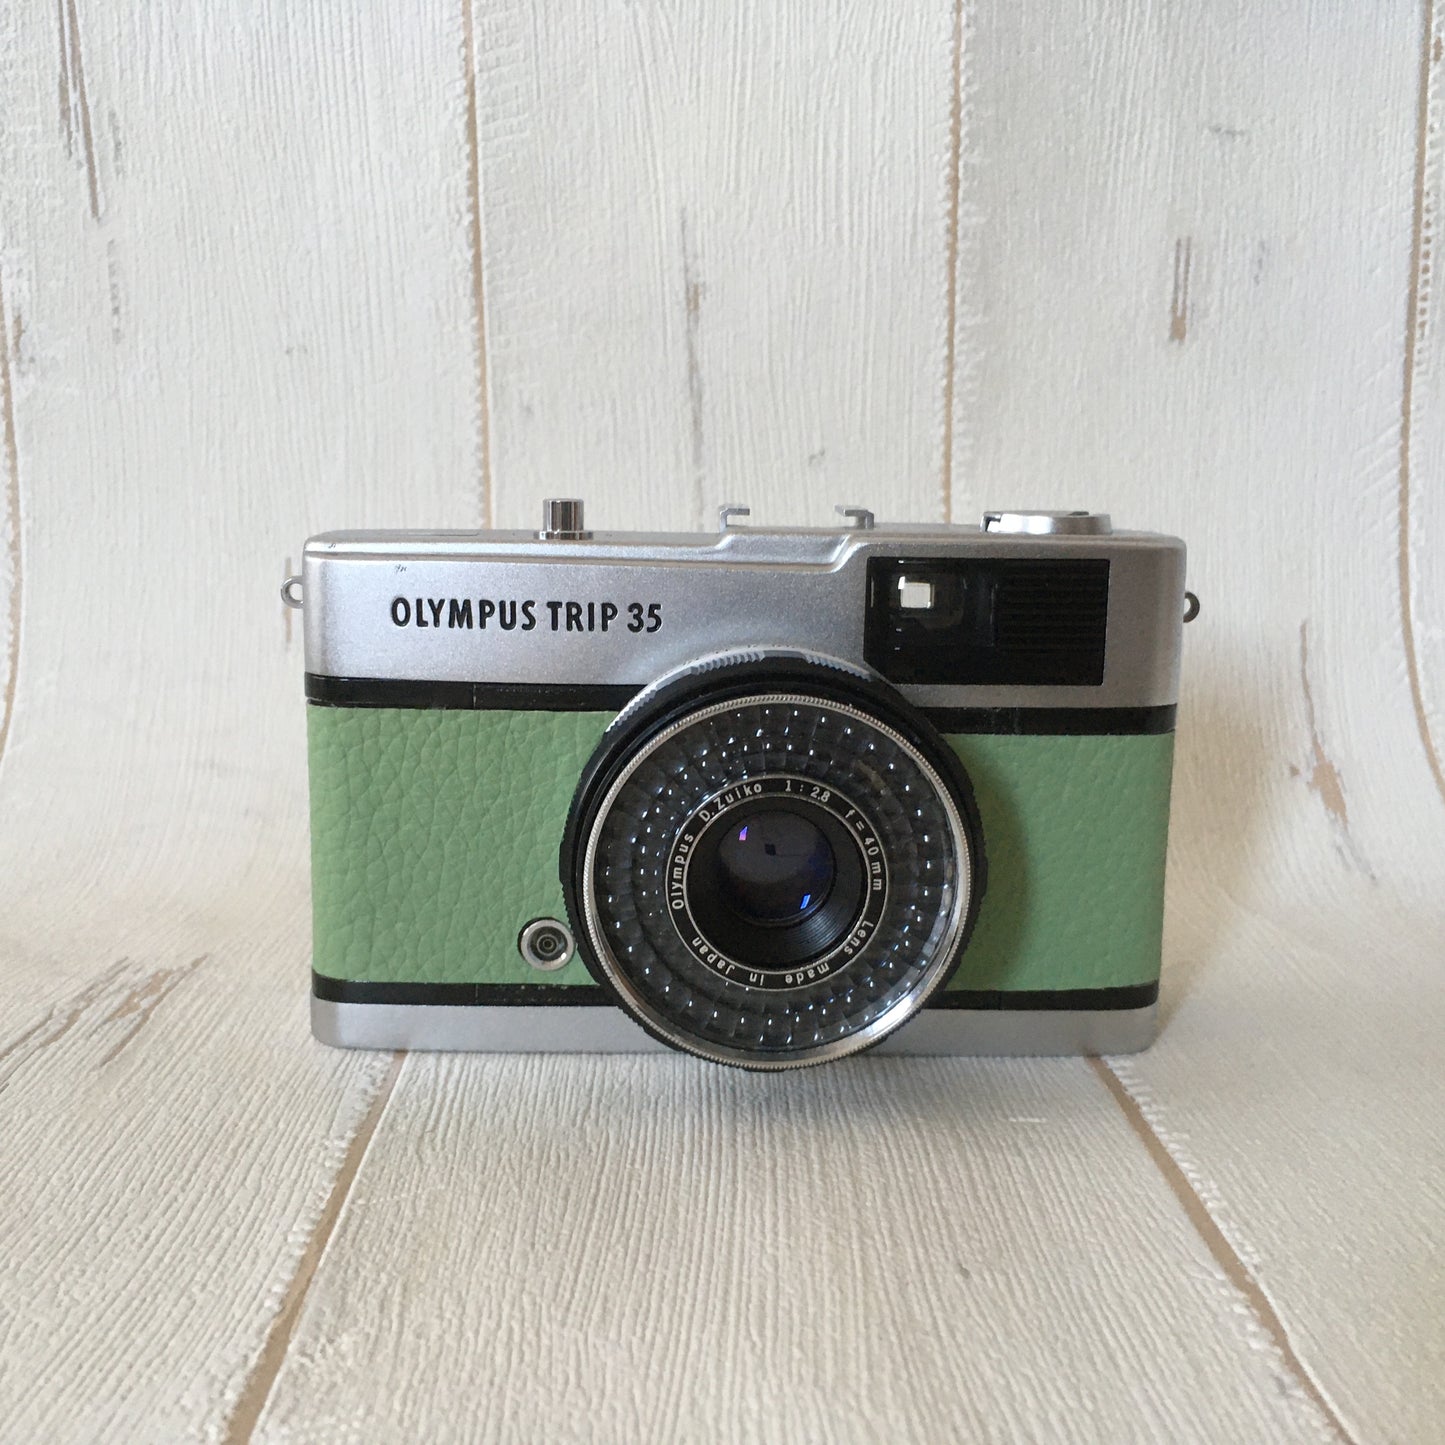 Olympus TRIP35  with wasabi green shrink leather